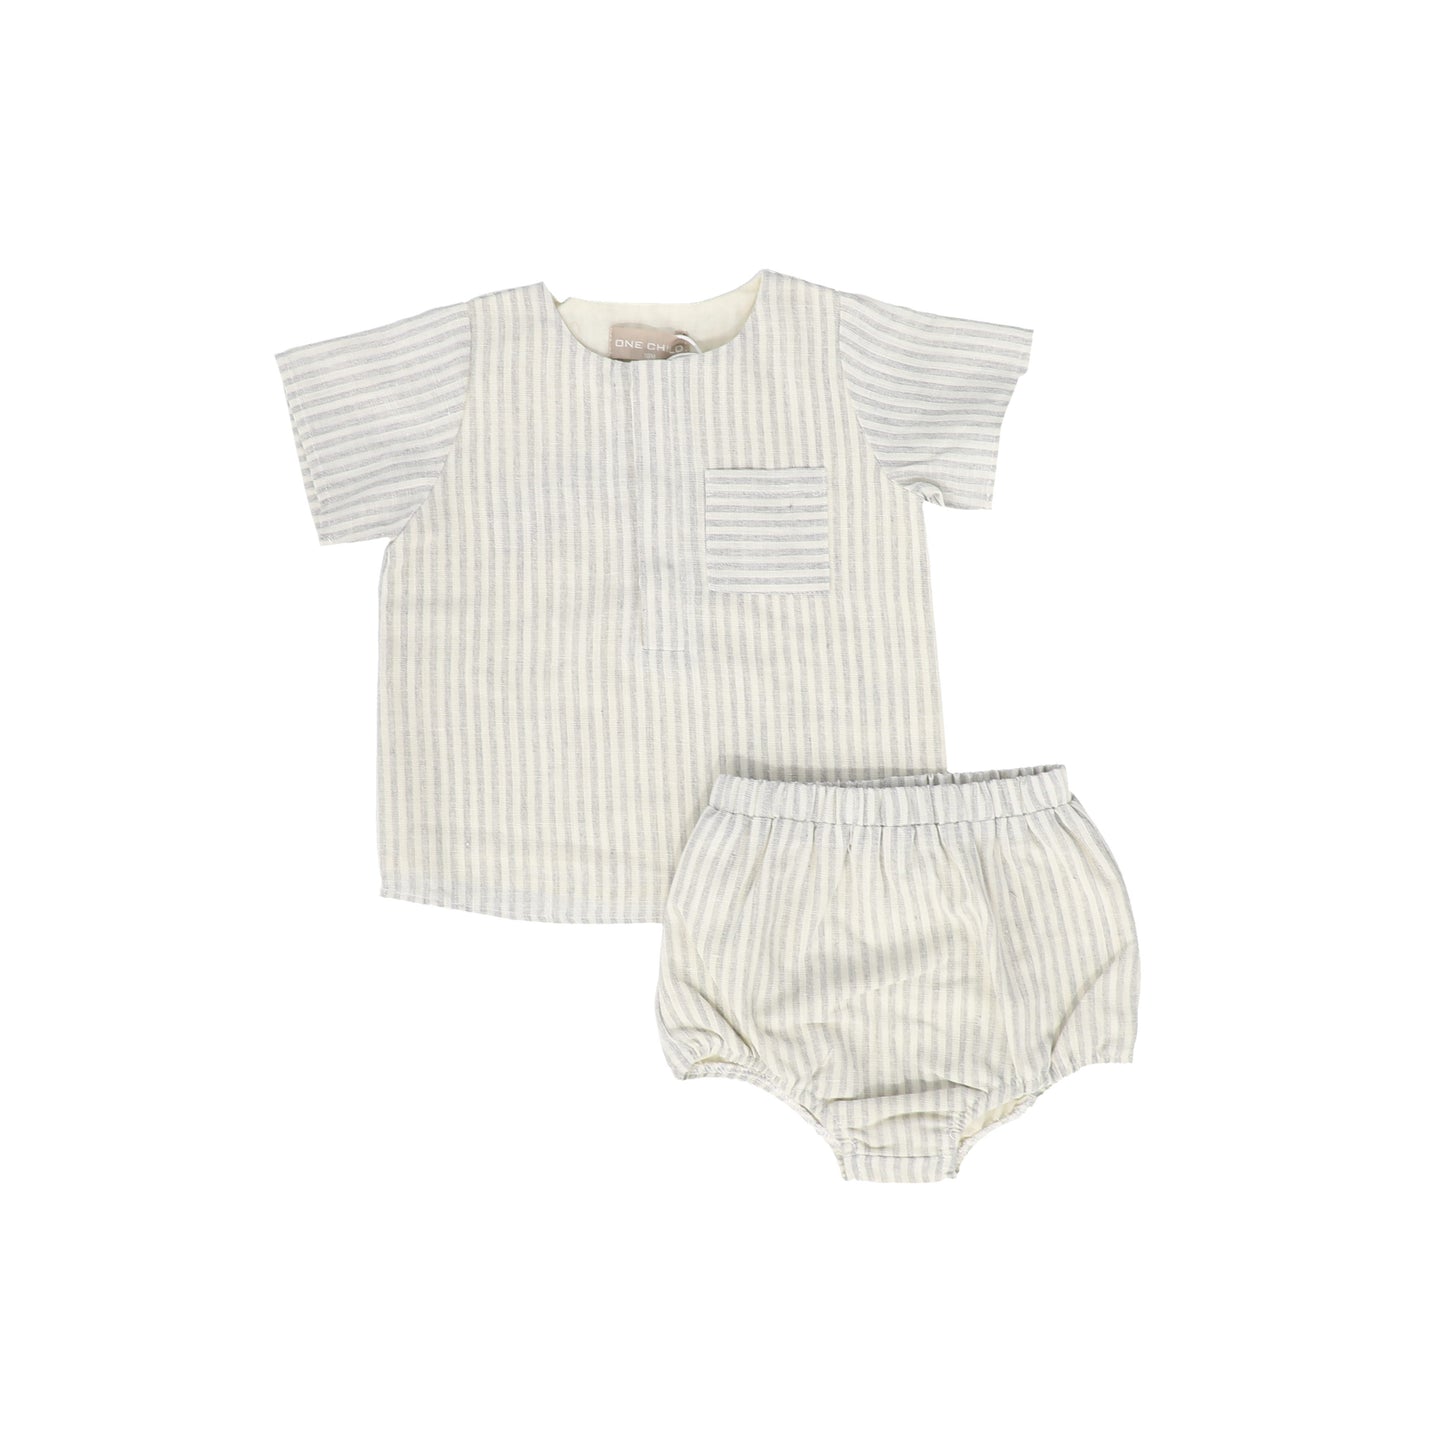 ONE CHILD GREY STRIPED HENLEY SHIRT AND BLOOMERS SET [FINAL SALE]